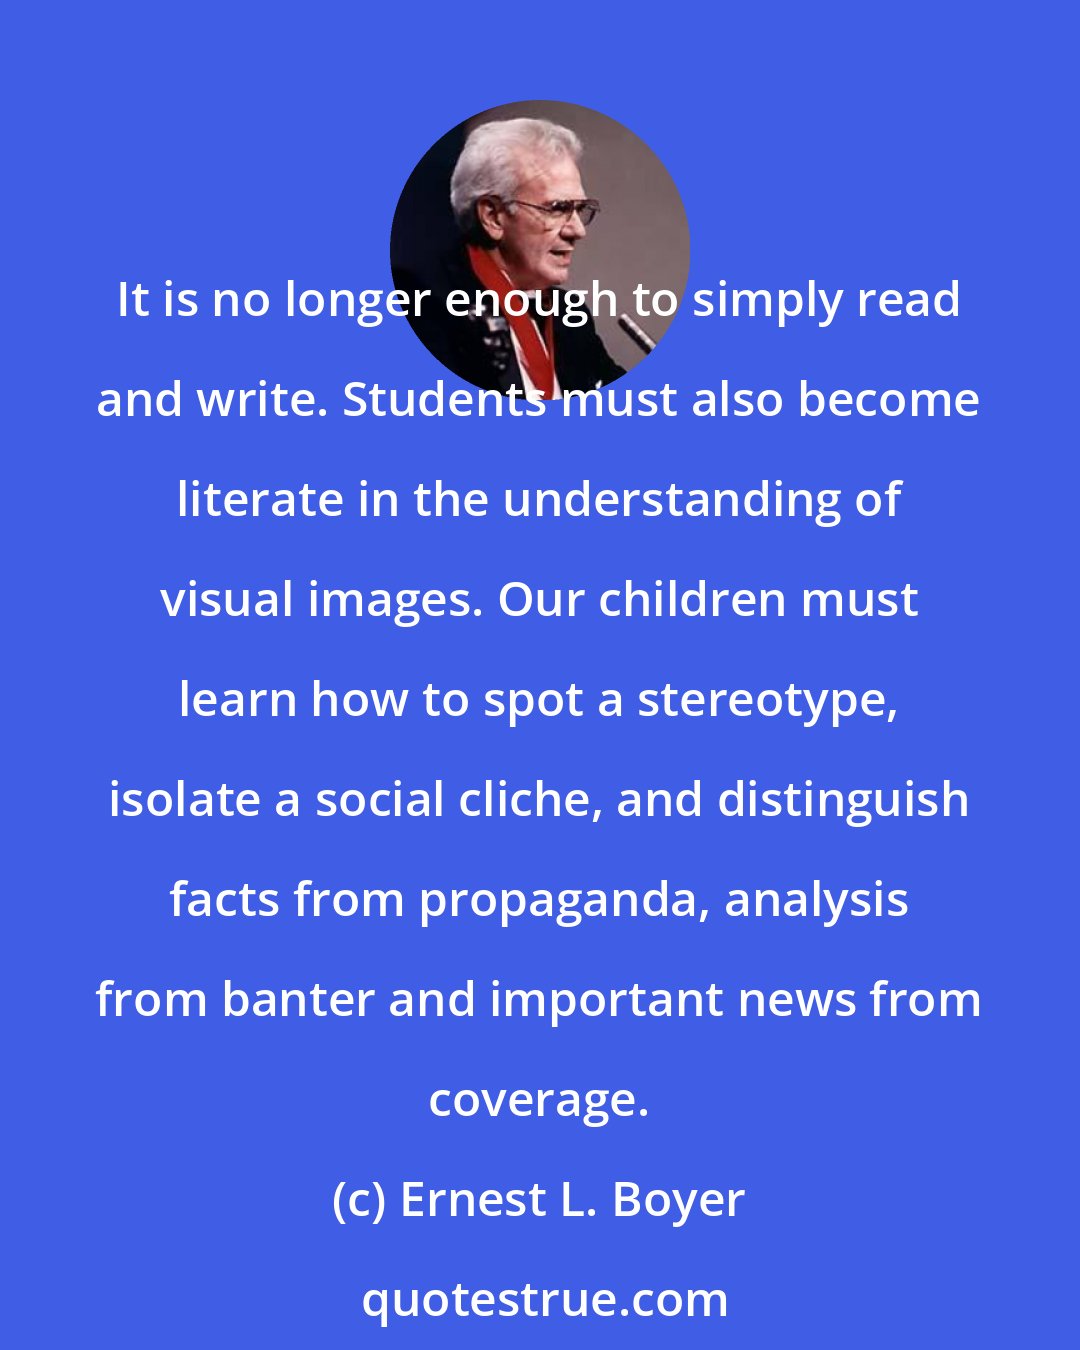 Ernest L. Boyer: It is no longer enough to simply read and write. Students must also become literate in the understanding of visual images. Our children must learn how to spot a stereotype, isolate a social cliche, and distinguish facts from propaganda, analysis from banter and important news from coverage.